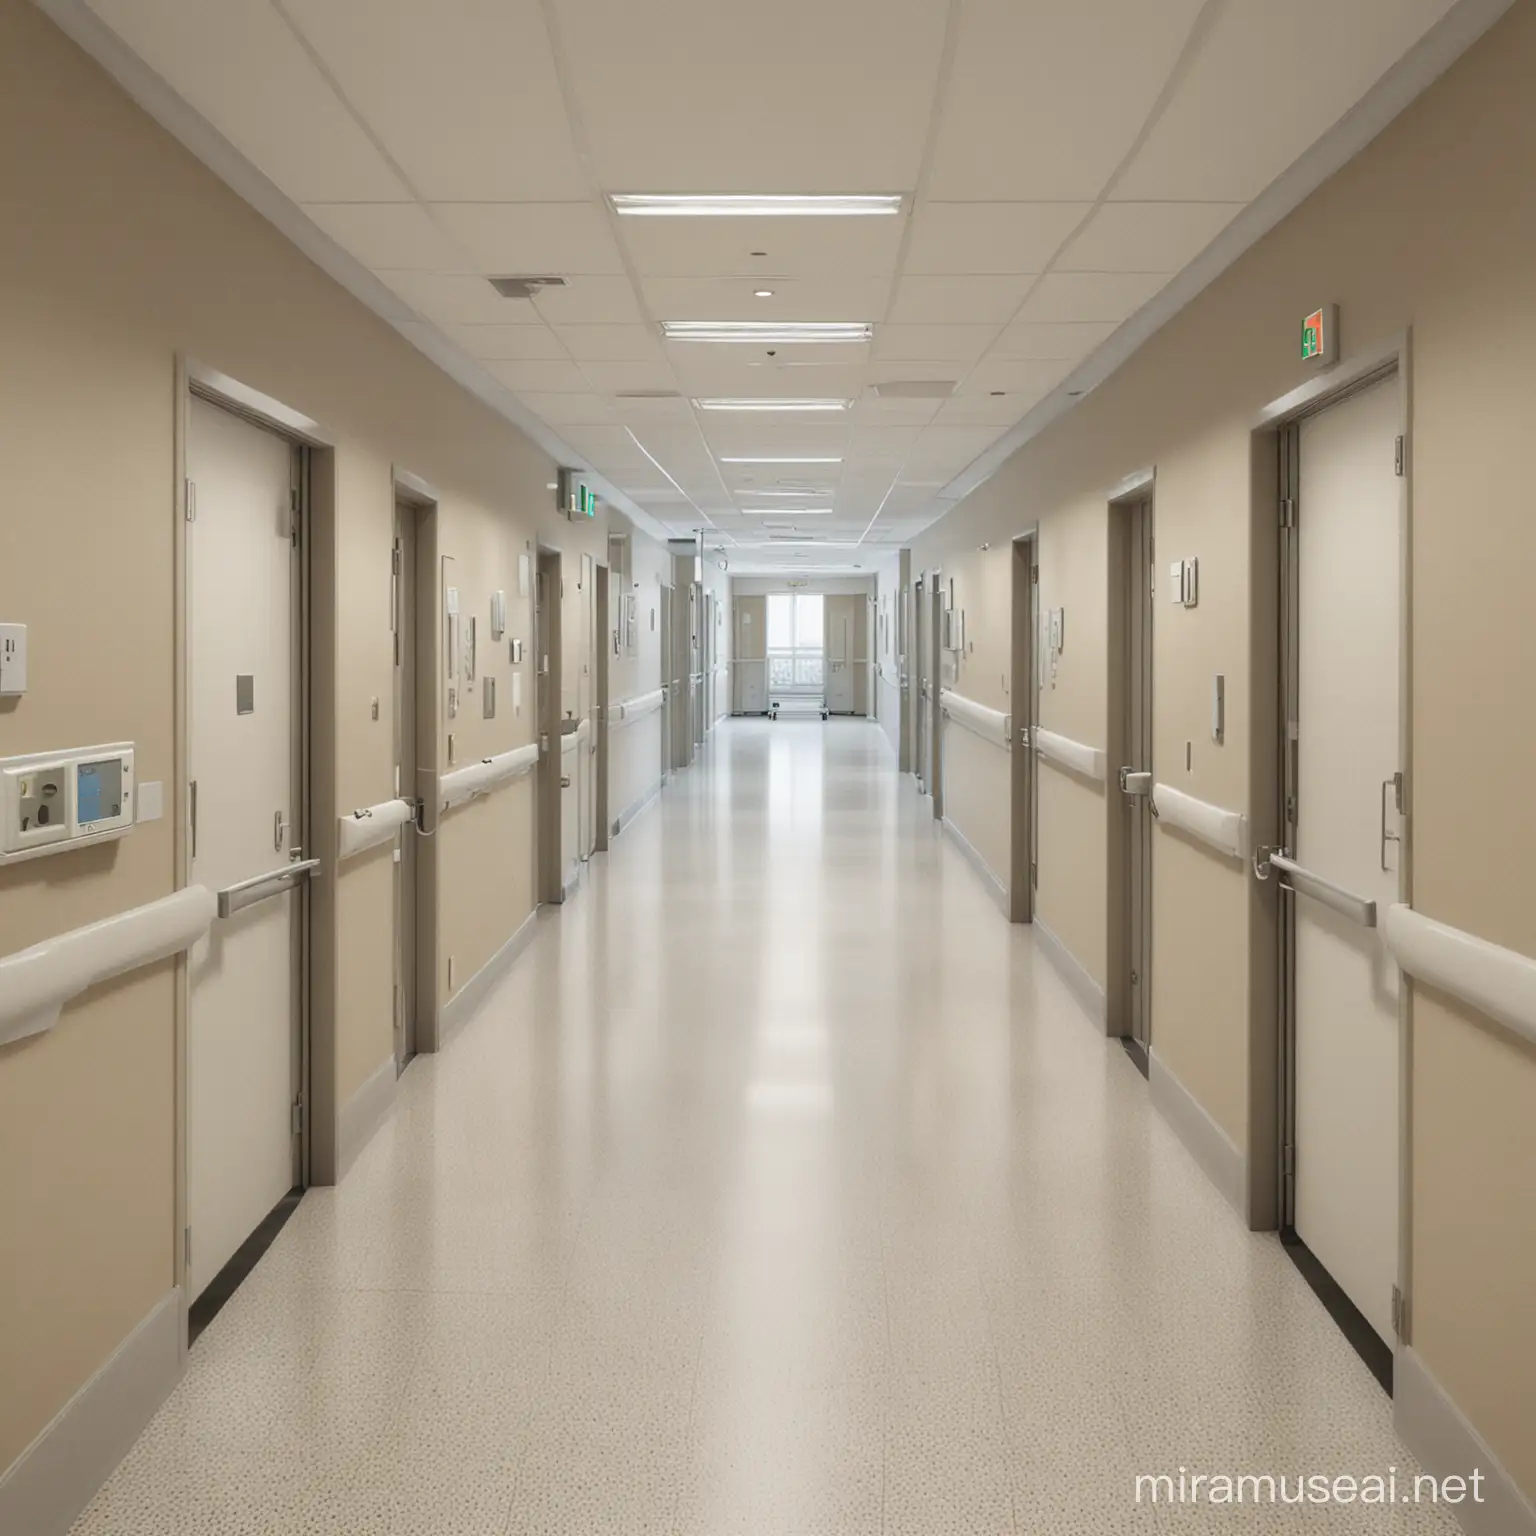 HighResolution 3D Hospital Interior Spacious Room and Welcoming Corridor